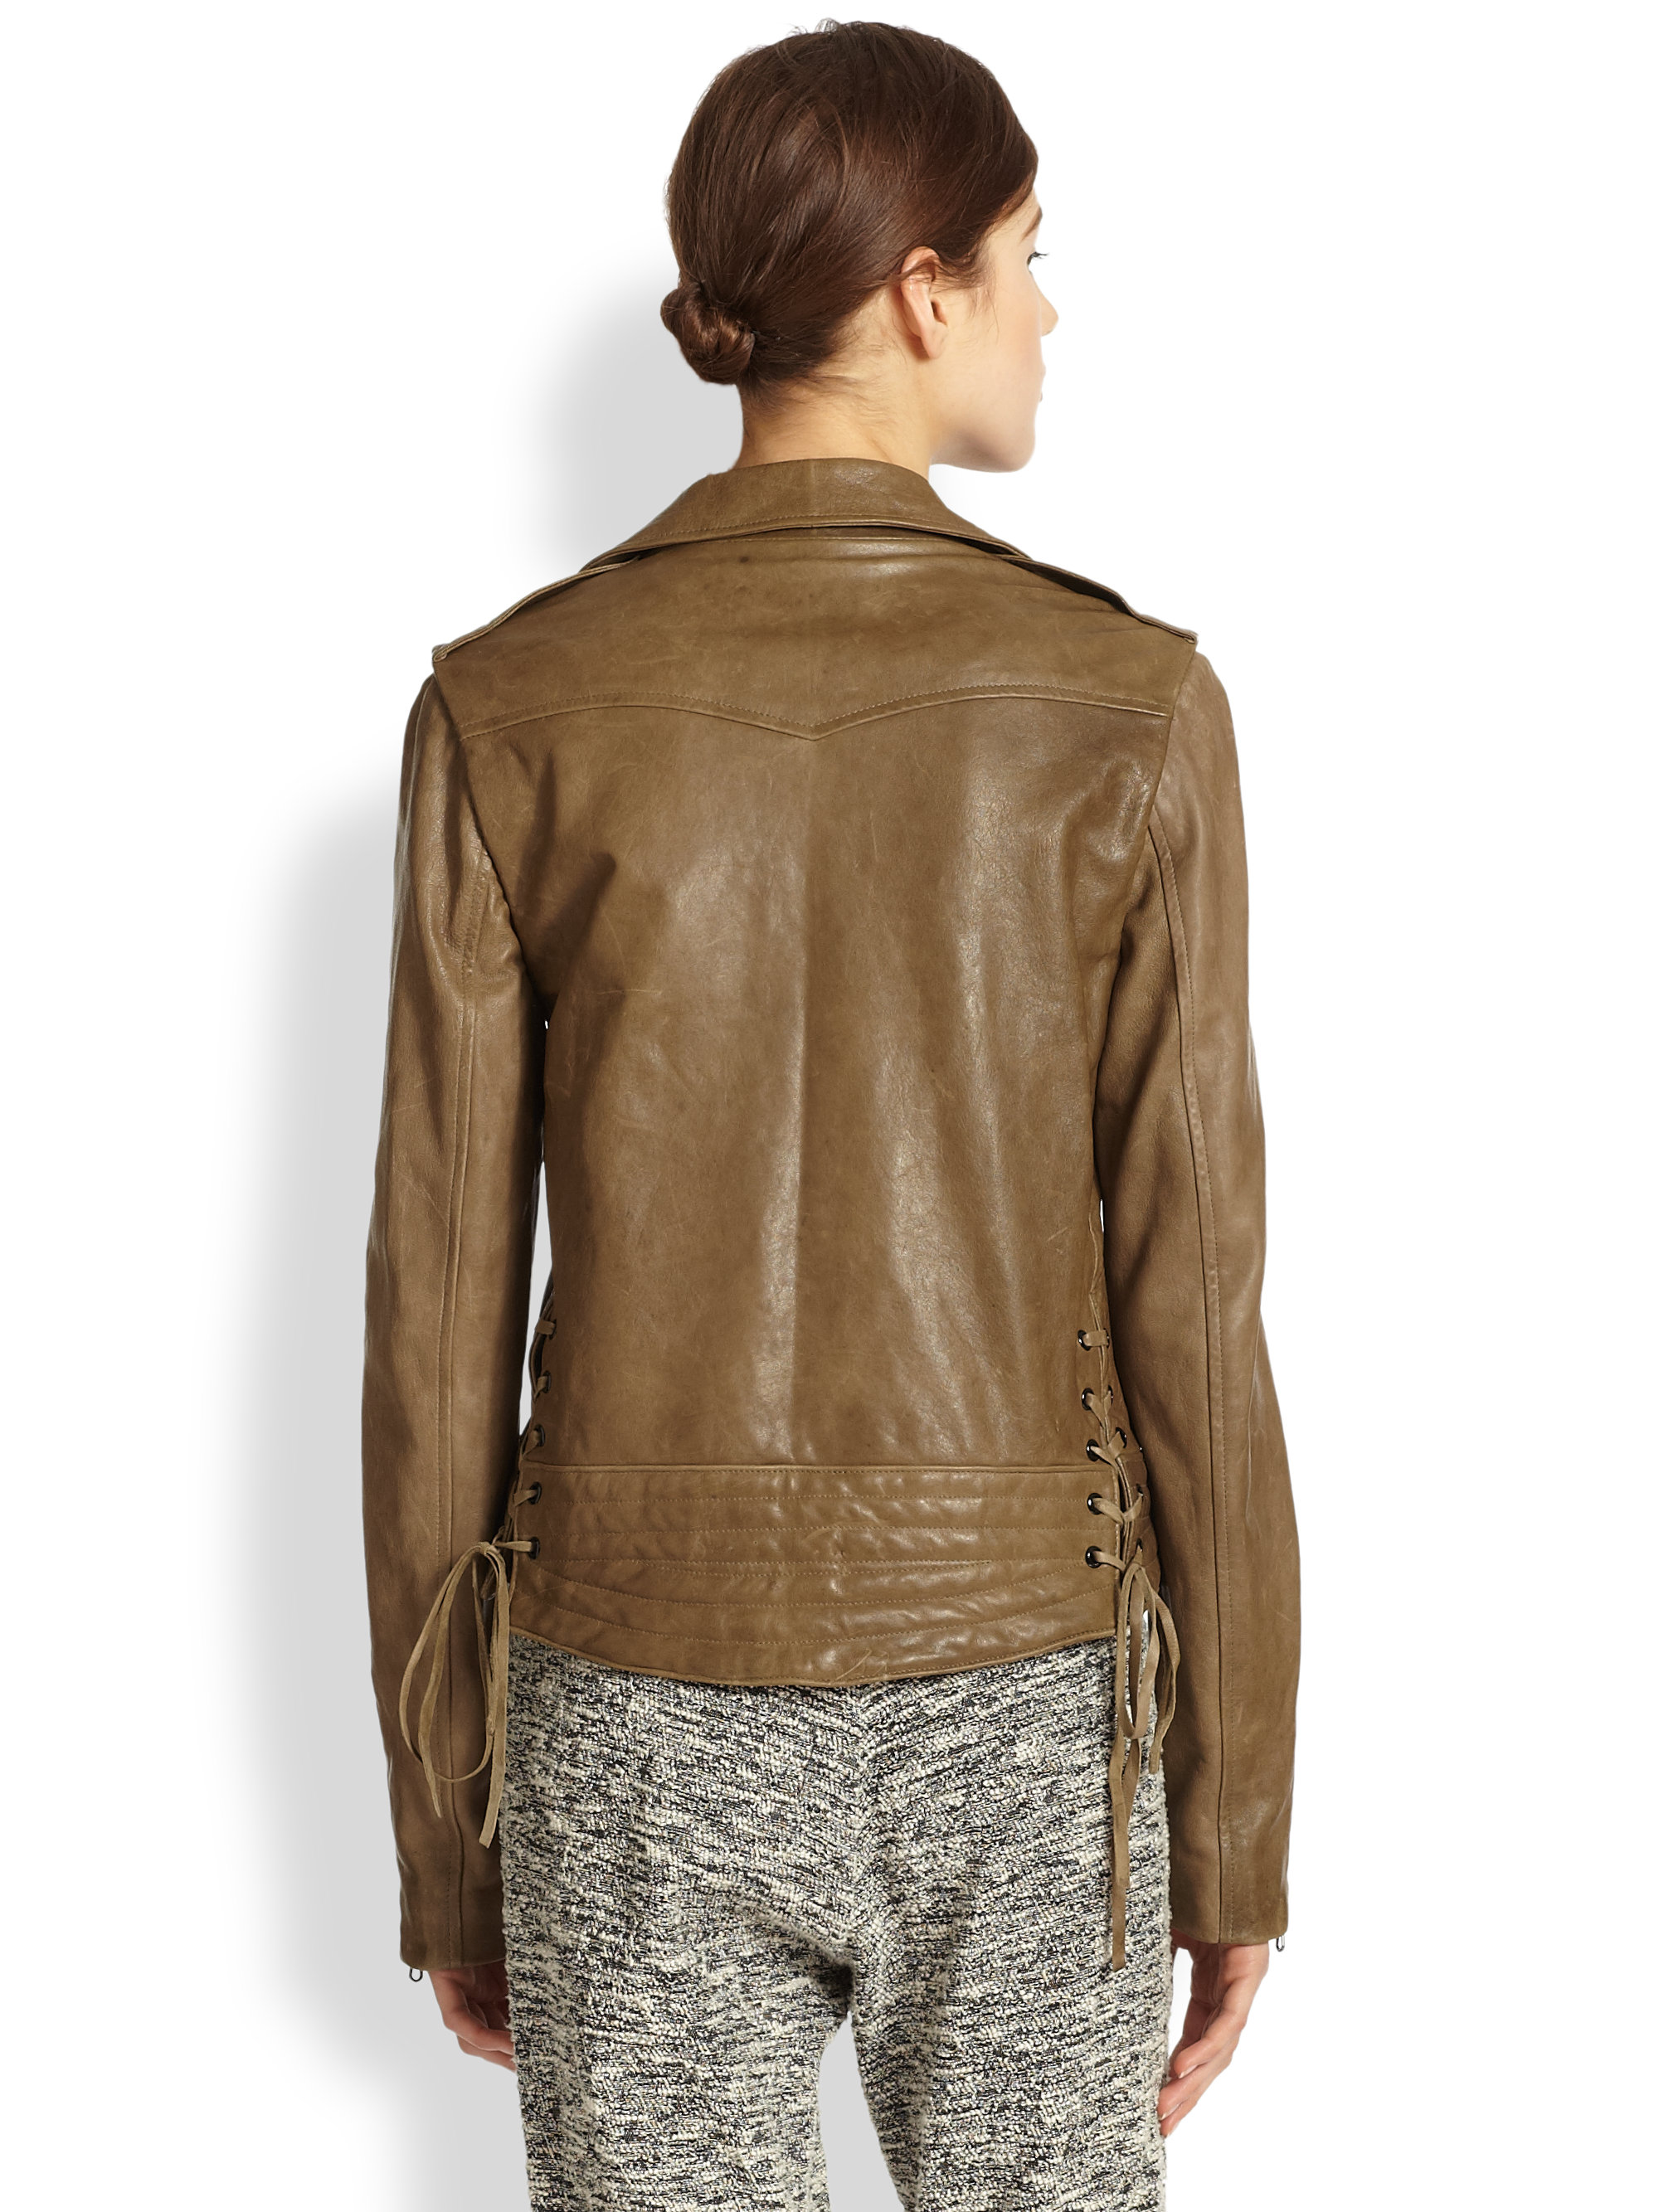 Lyst - Rag & bone Bowery Convertible Leather Jacket in Brown